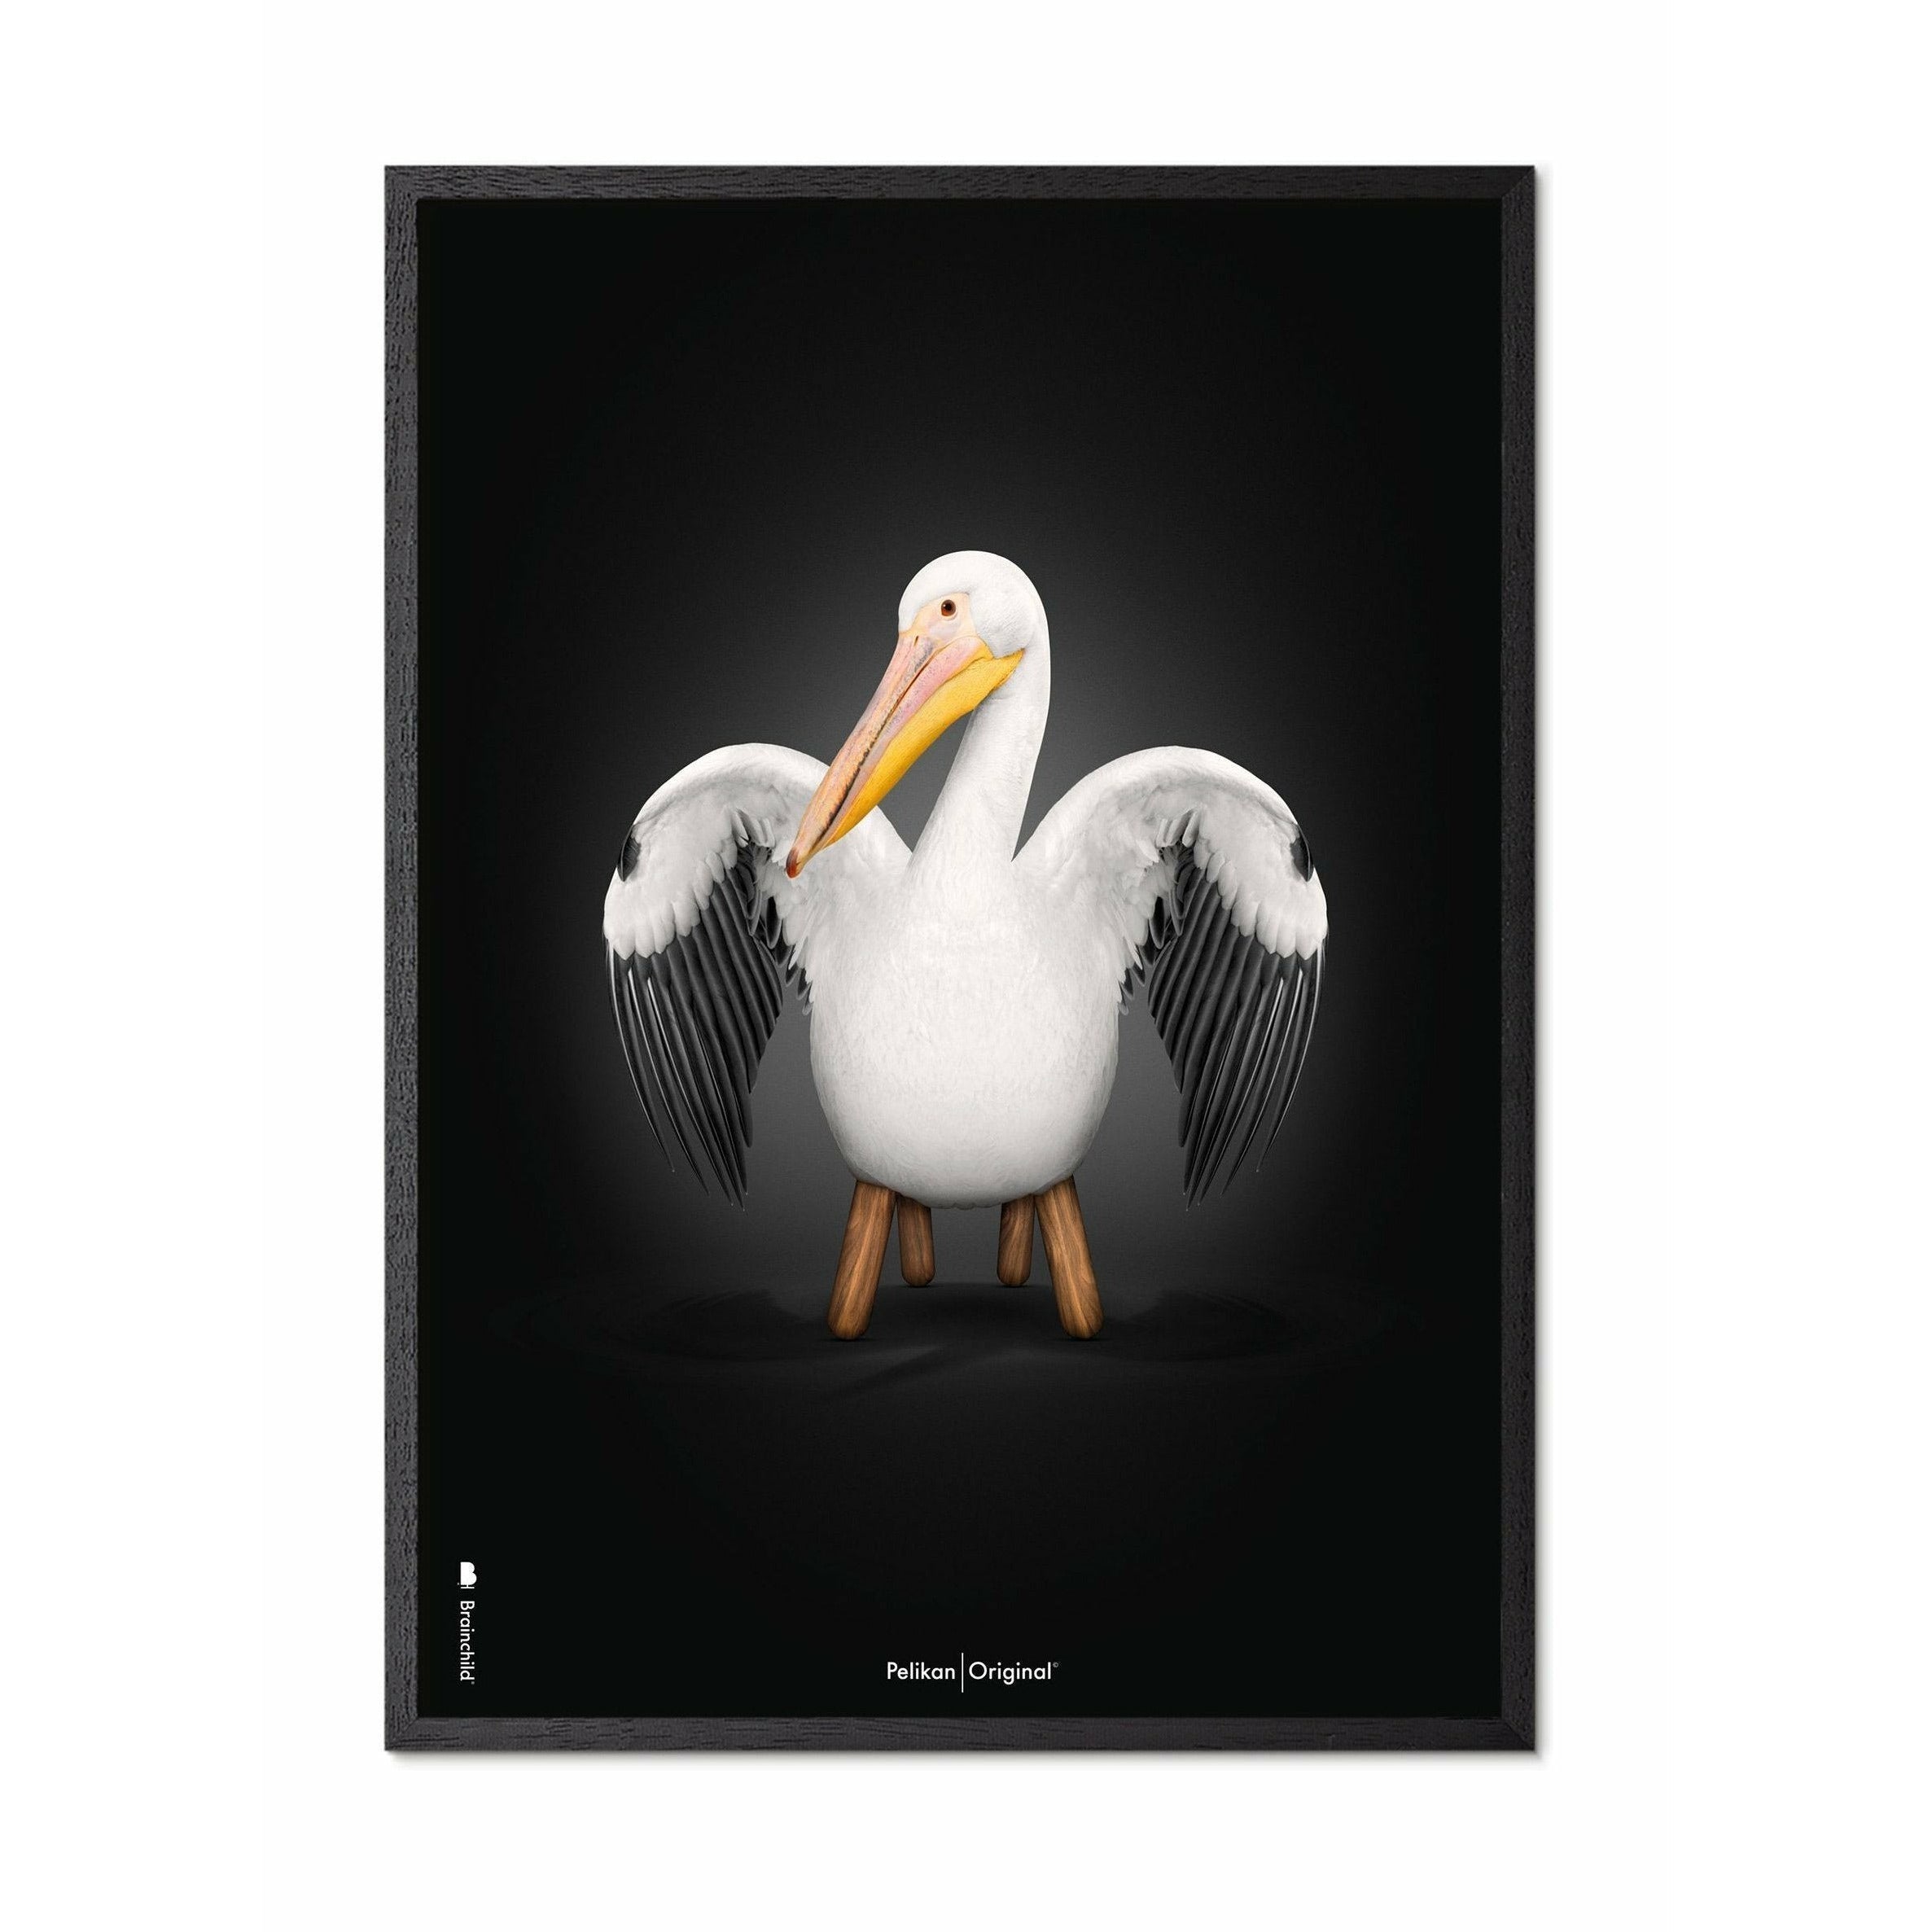 Brainchild Pelikan Classic Poster, Frame In Black Lacquered Wood A5, Black Background